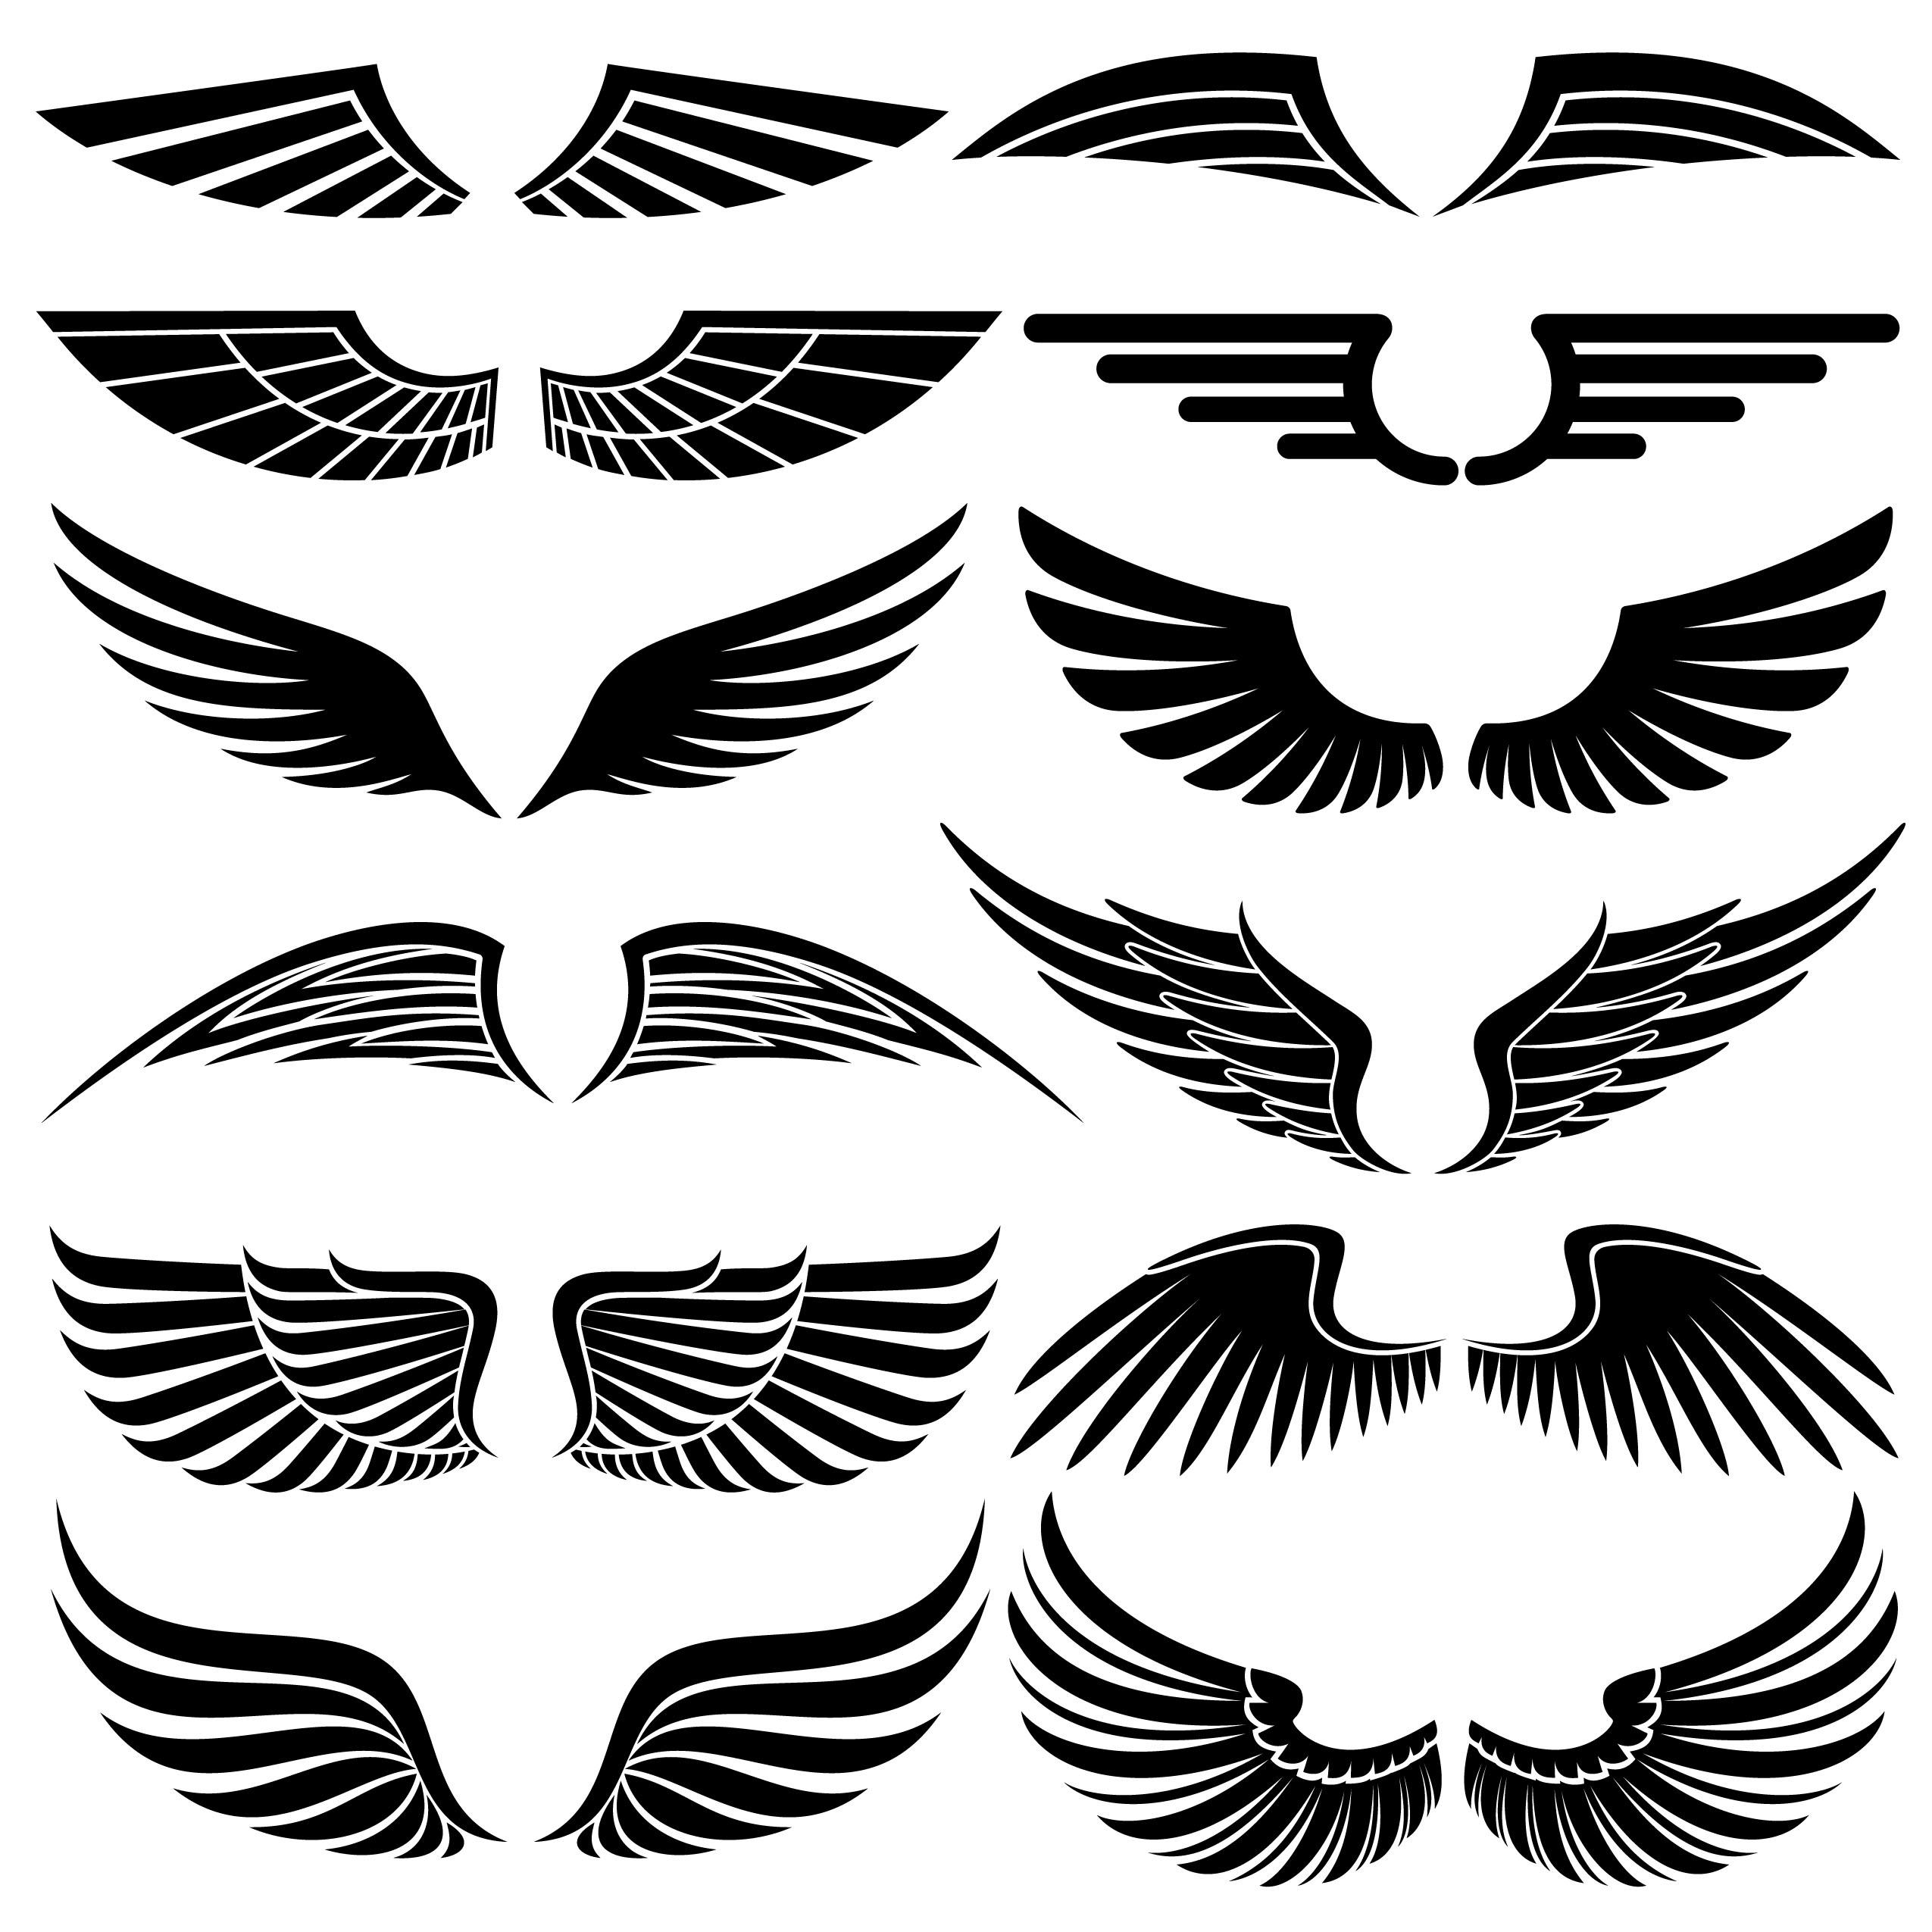 12 Wing Brushes by